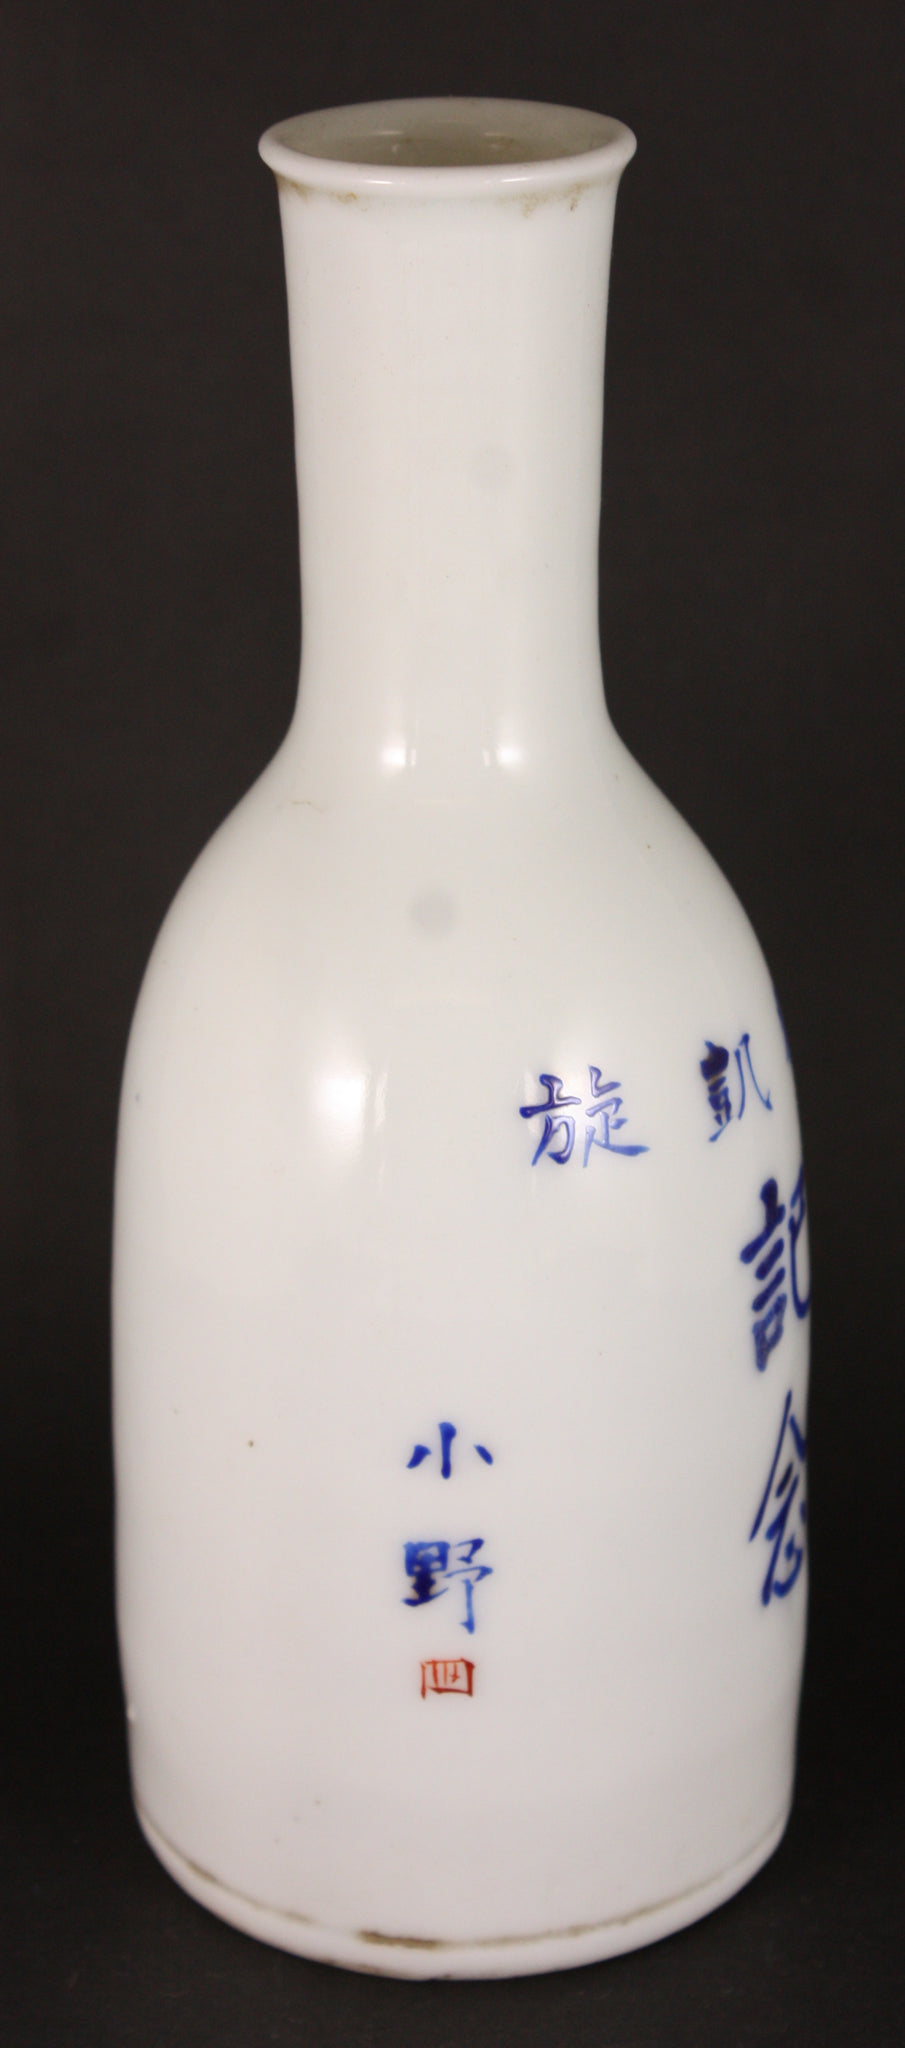 Rare Antique Japanese Military WW1 Germany Conquest Army Sake Bottle